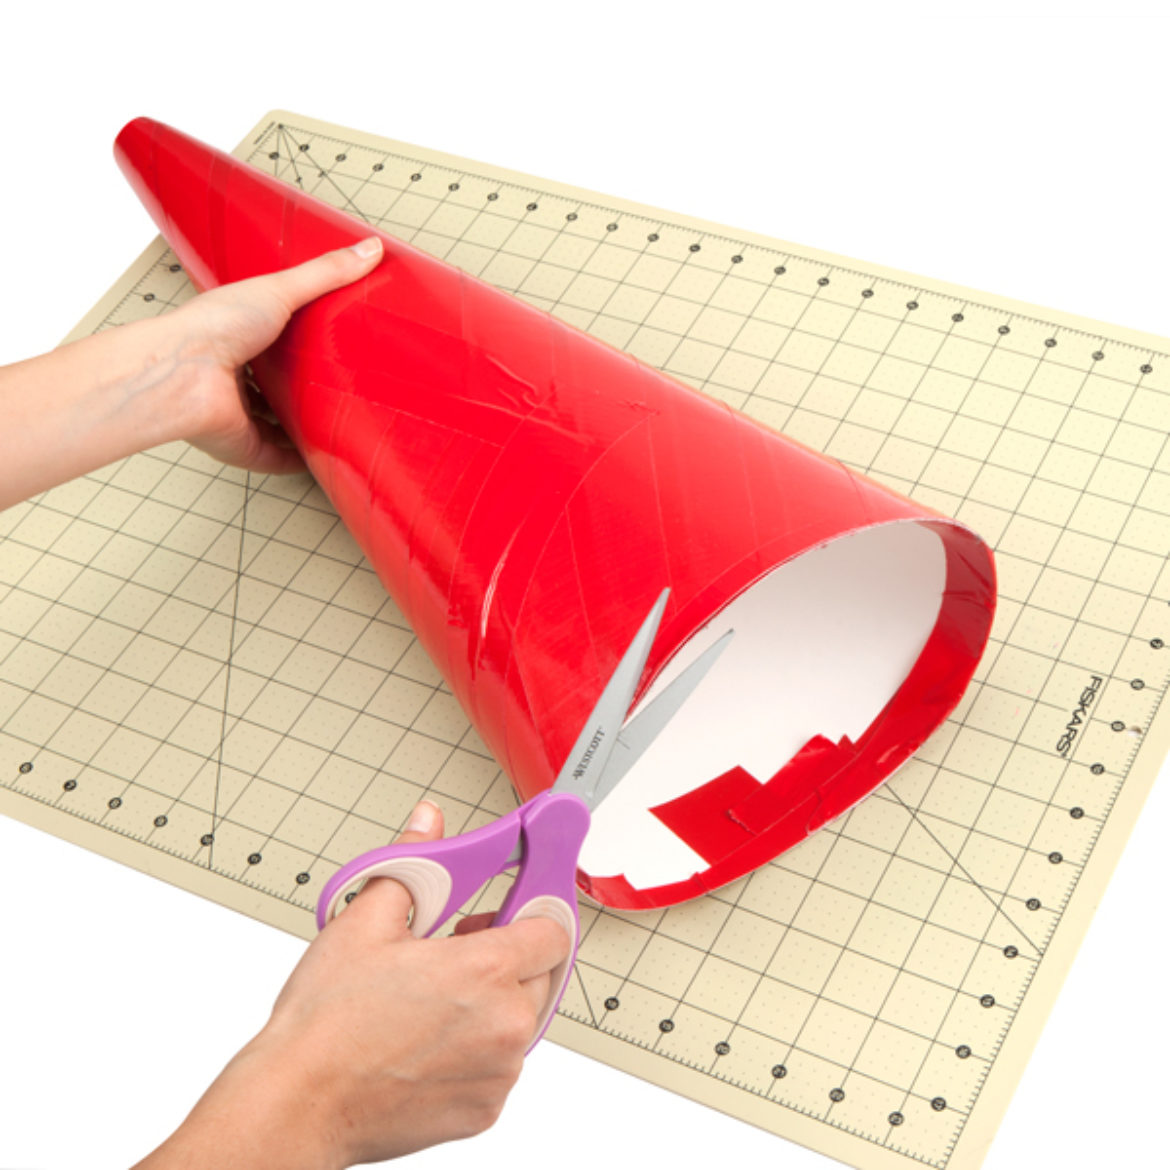 Cone being cut so that the edges are even